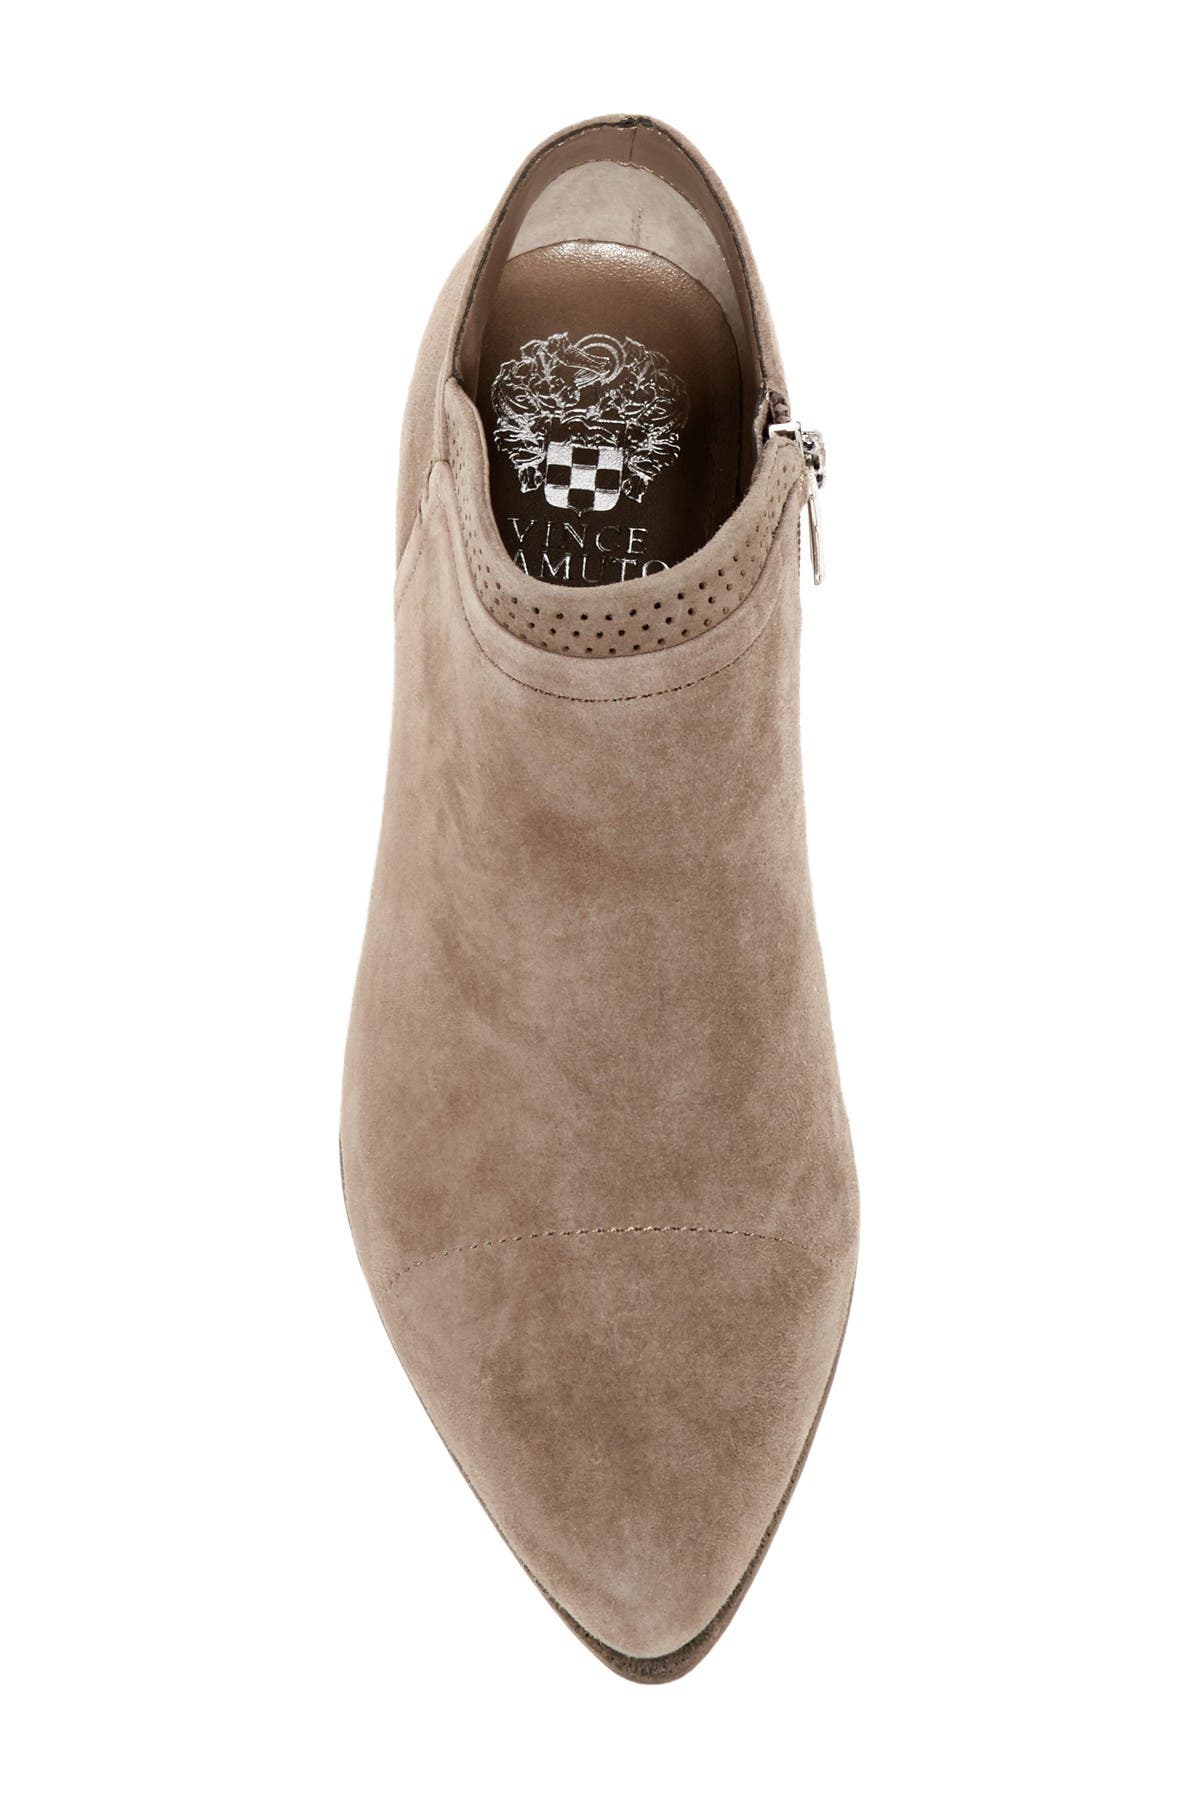 vince camuto jannie suede ankle bootie